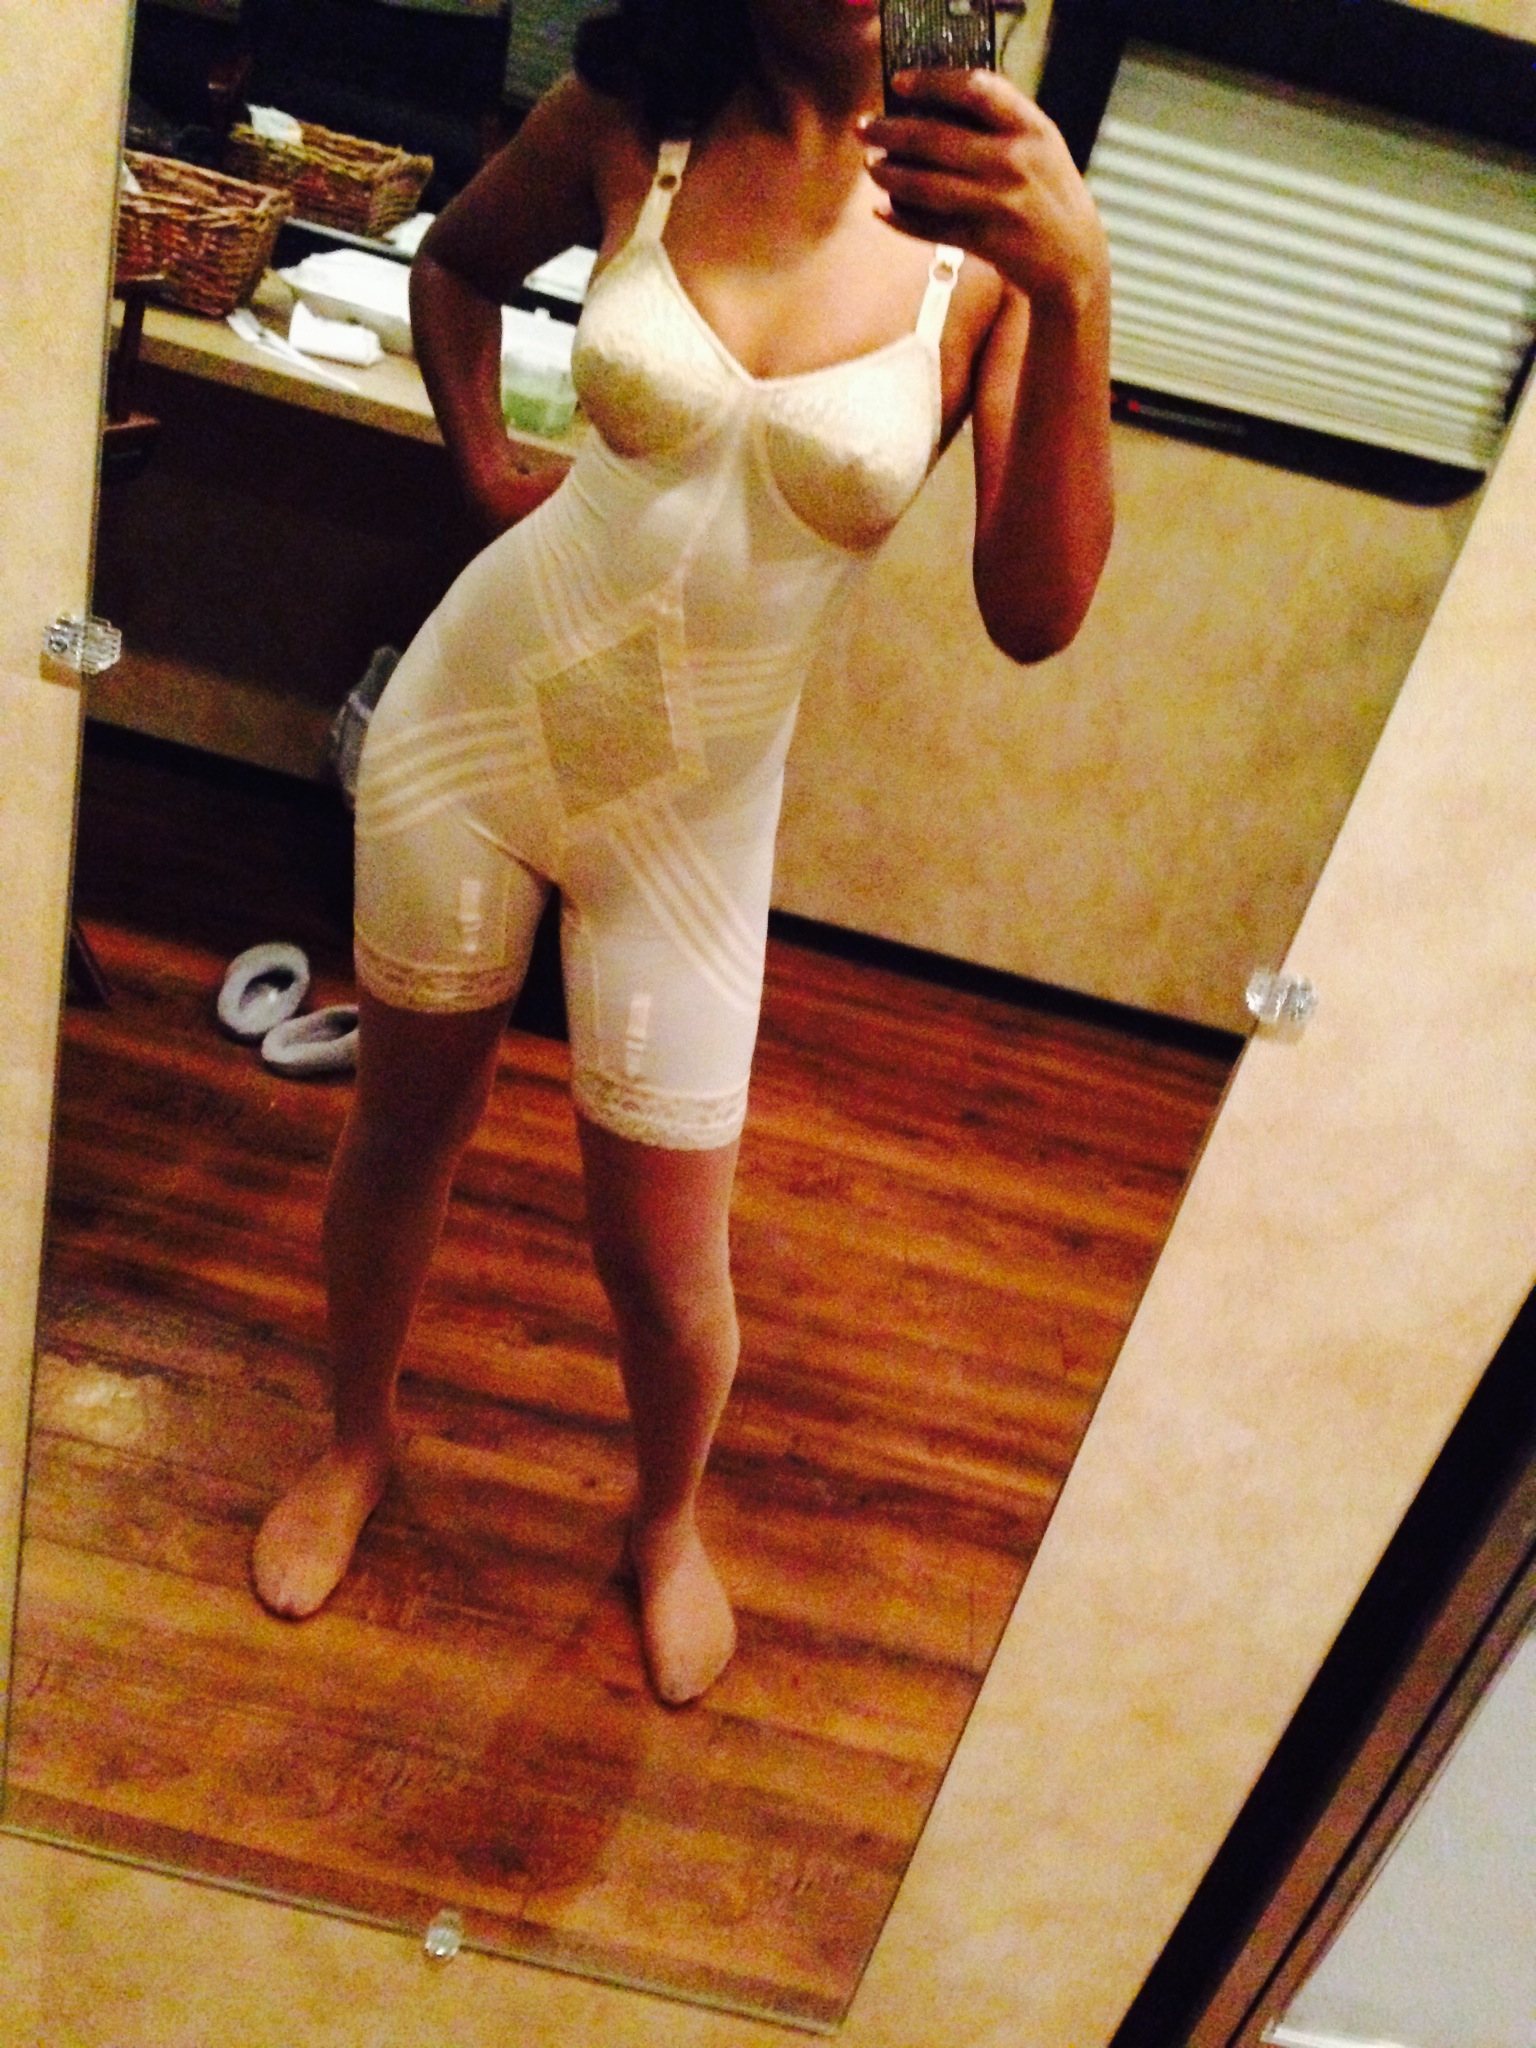 Keke palmer nude pictures